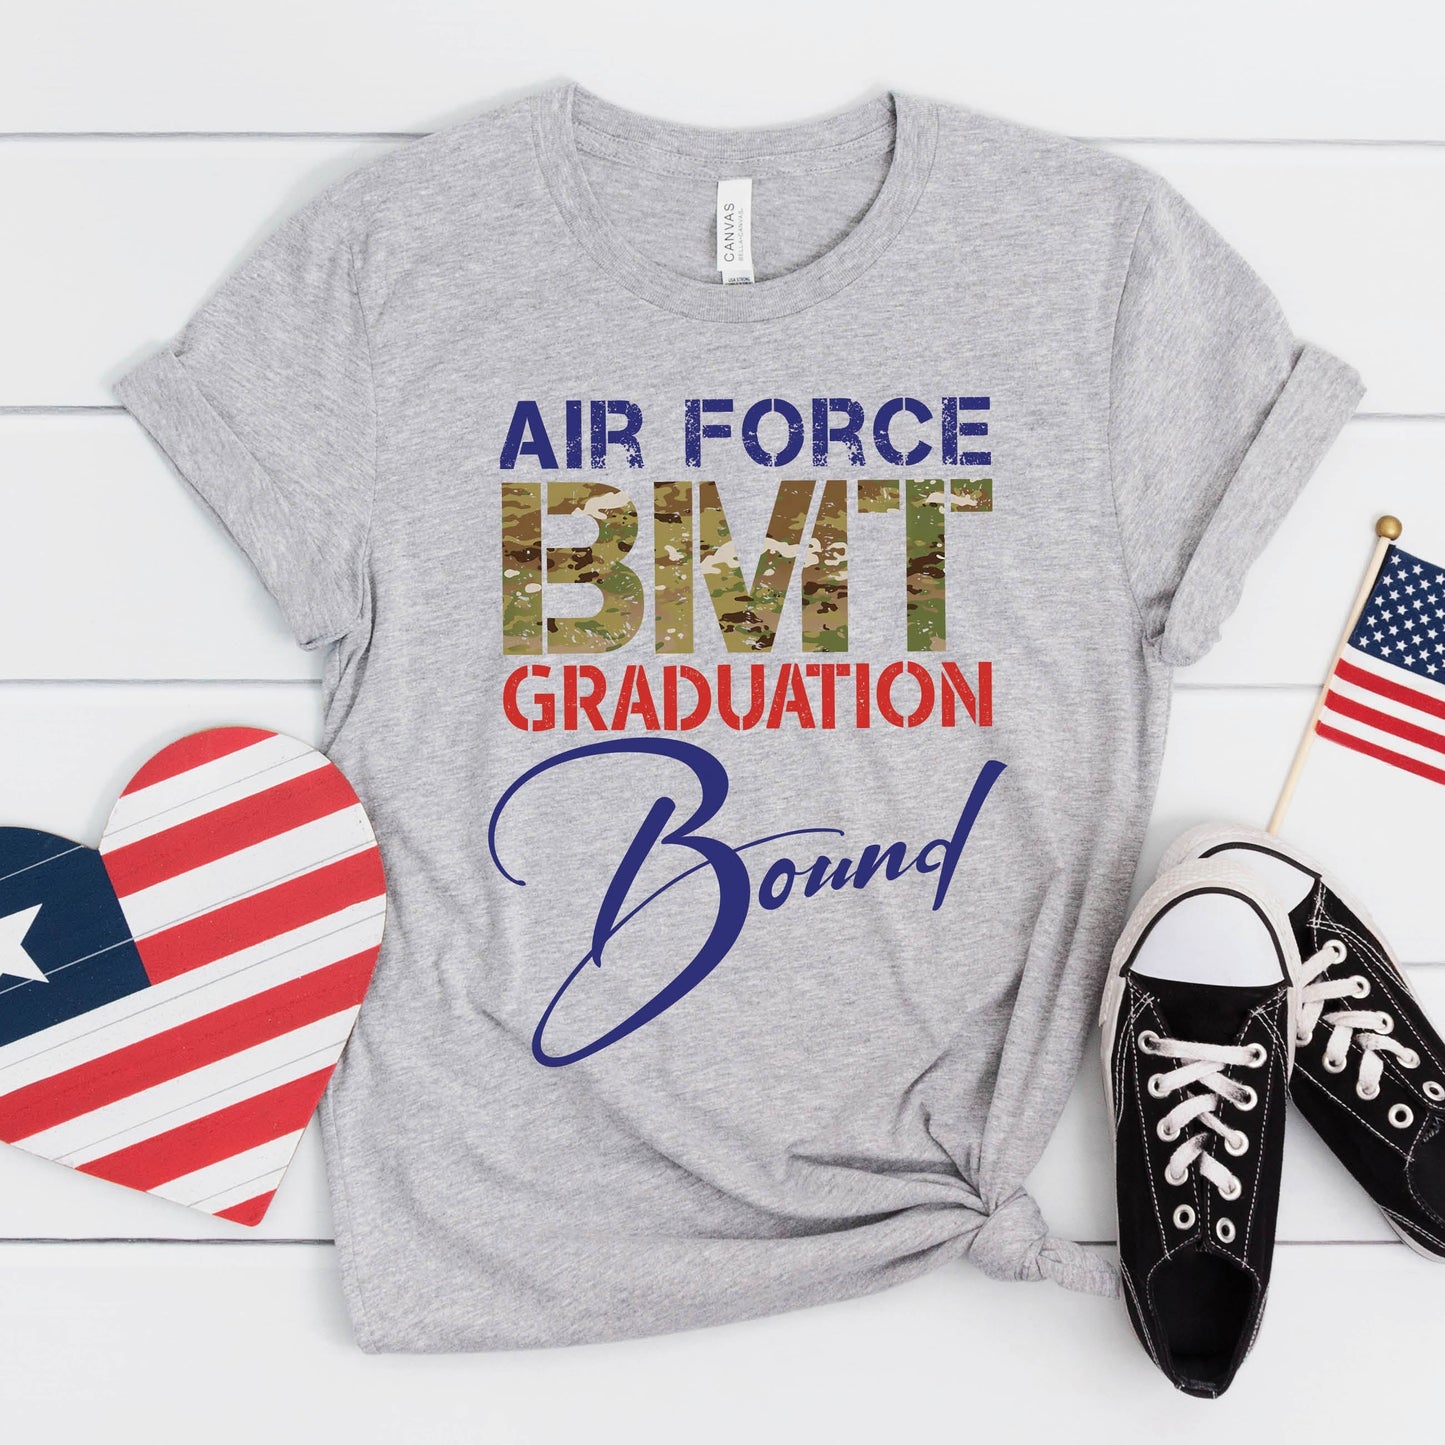 Heather Gray Air Force BMT Graduation Bound t-shirt with patriotic camouflage pattern for basic military training graduation BMT I shop travel outfit and t-shirts for proud Air Force Mom & Dad to head to Lackland AFB in style